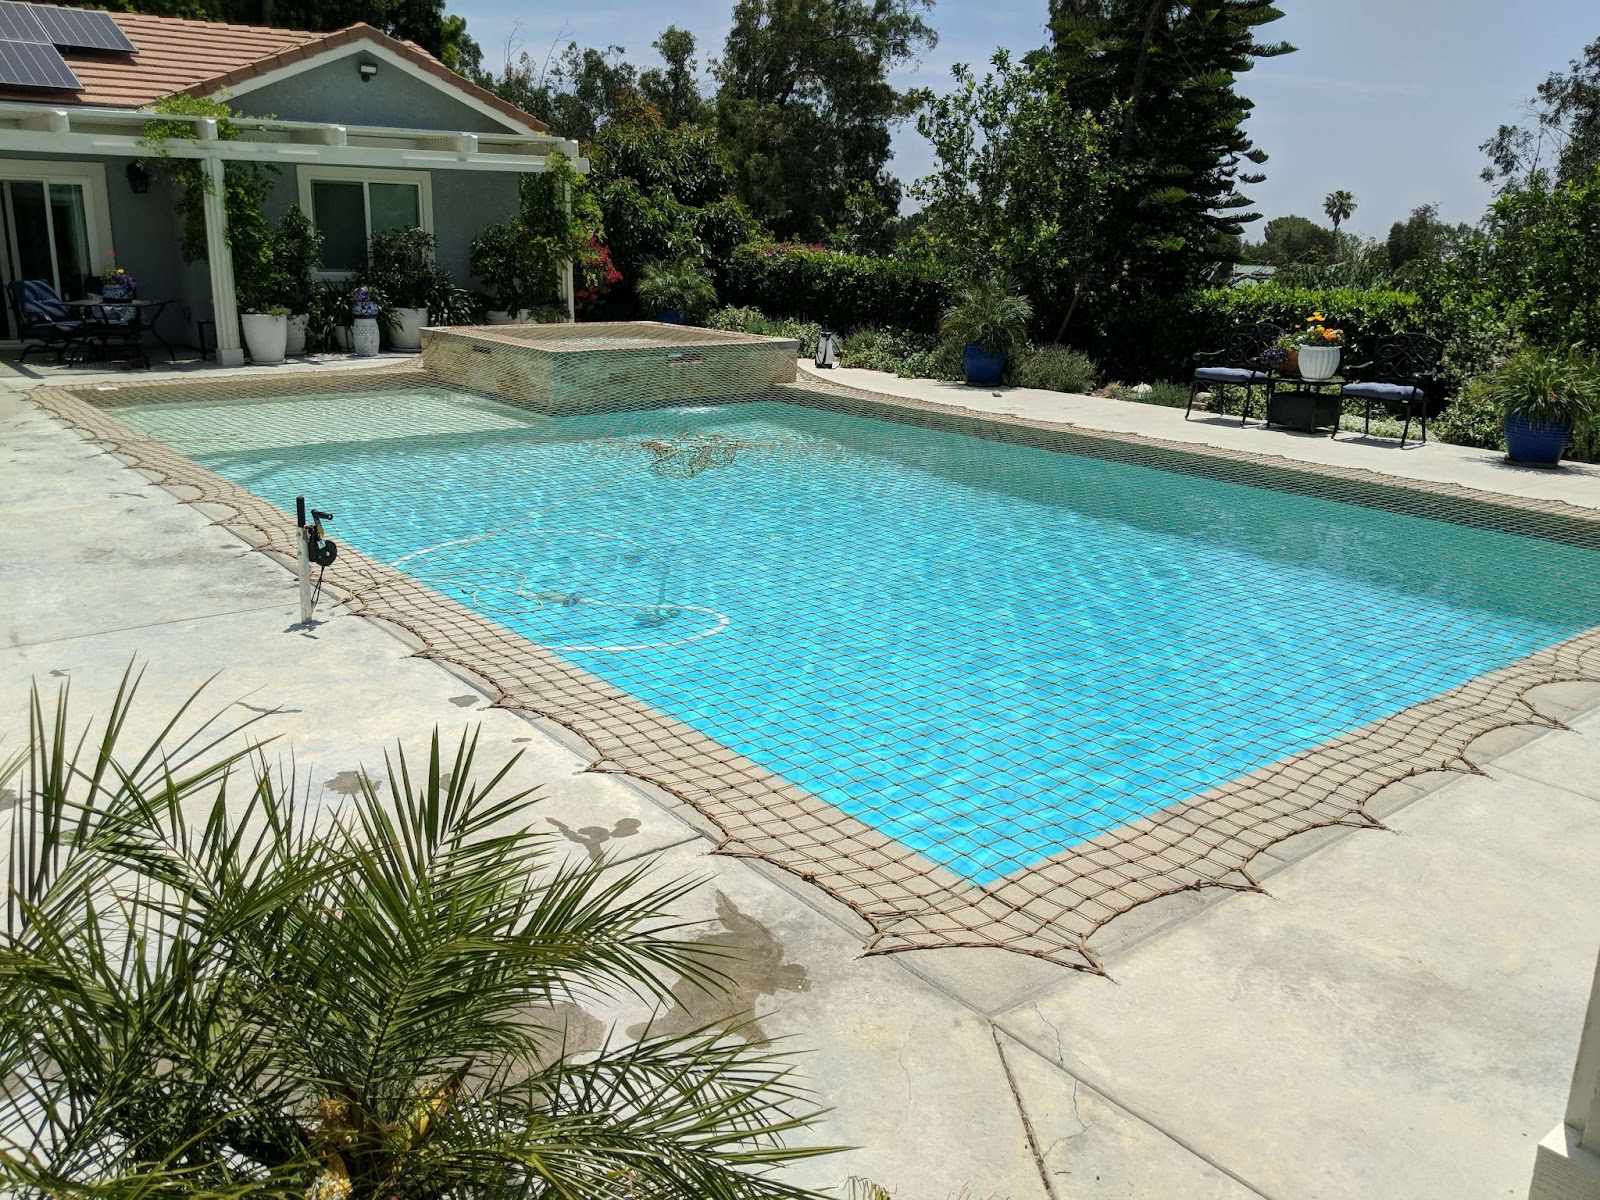 Tan pool safety net installed over a swimming pool
